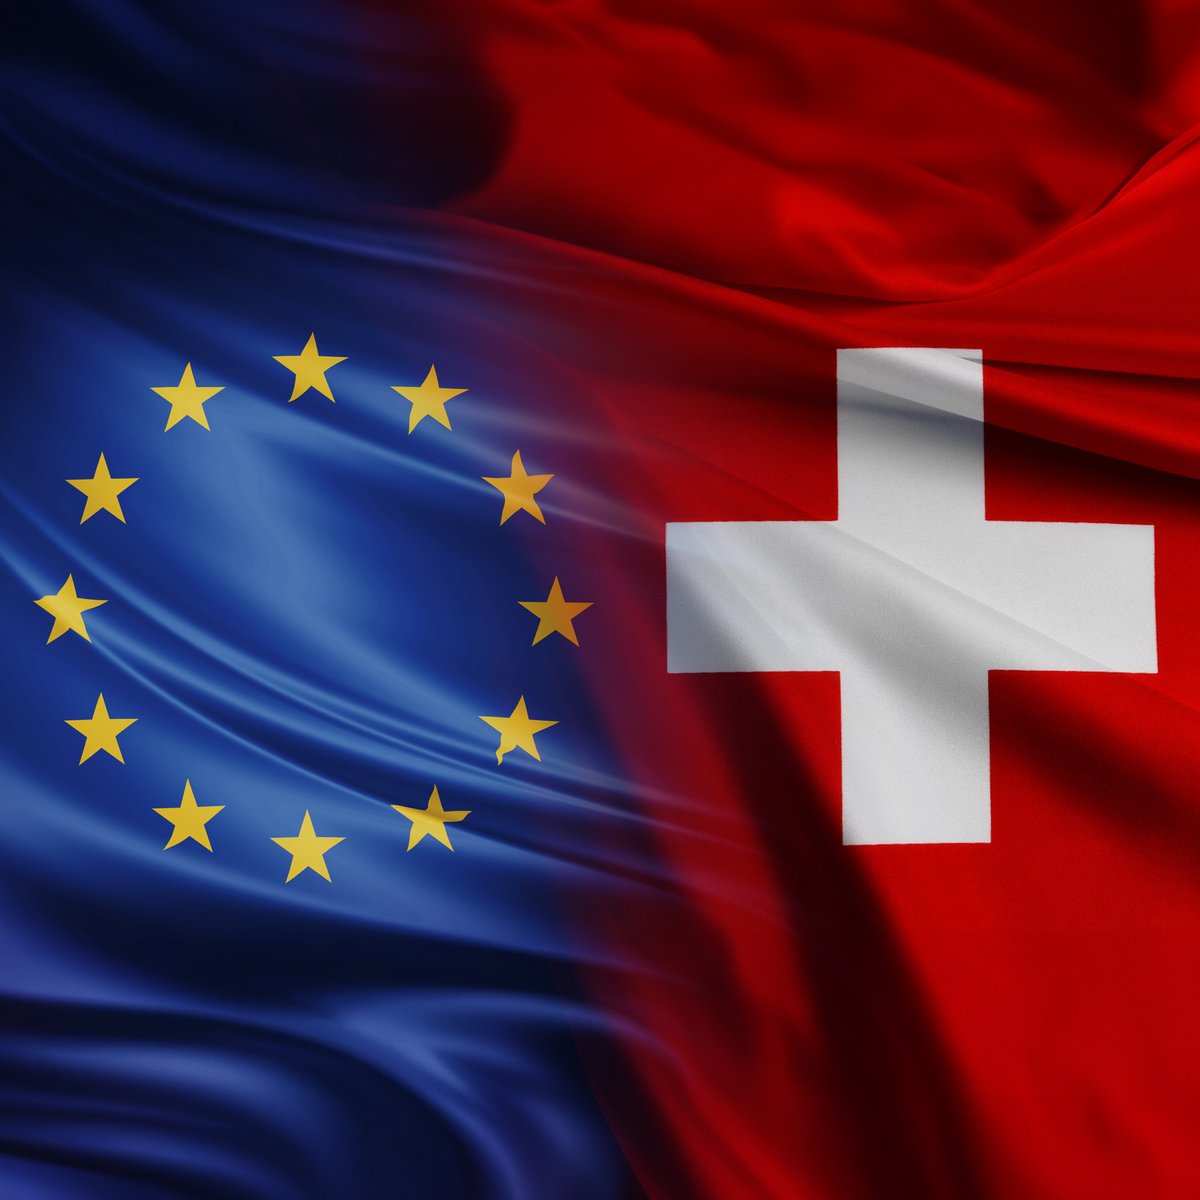 Today, the @EU_Commission endorsed the common understanding with Switzerland, reached after 18 months of exploratory talks. It will frame the negotiation of a broad package between the EU and Switzerland. This is a welcome and important step in our bilateral relationship.